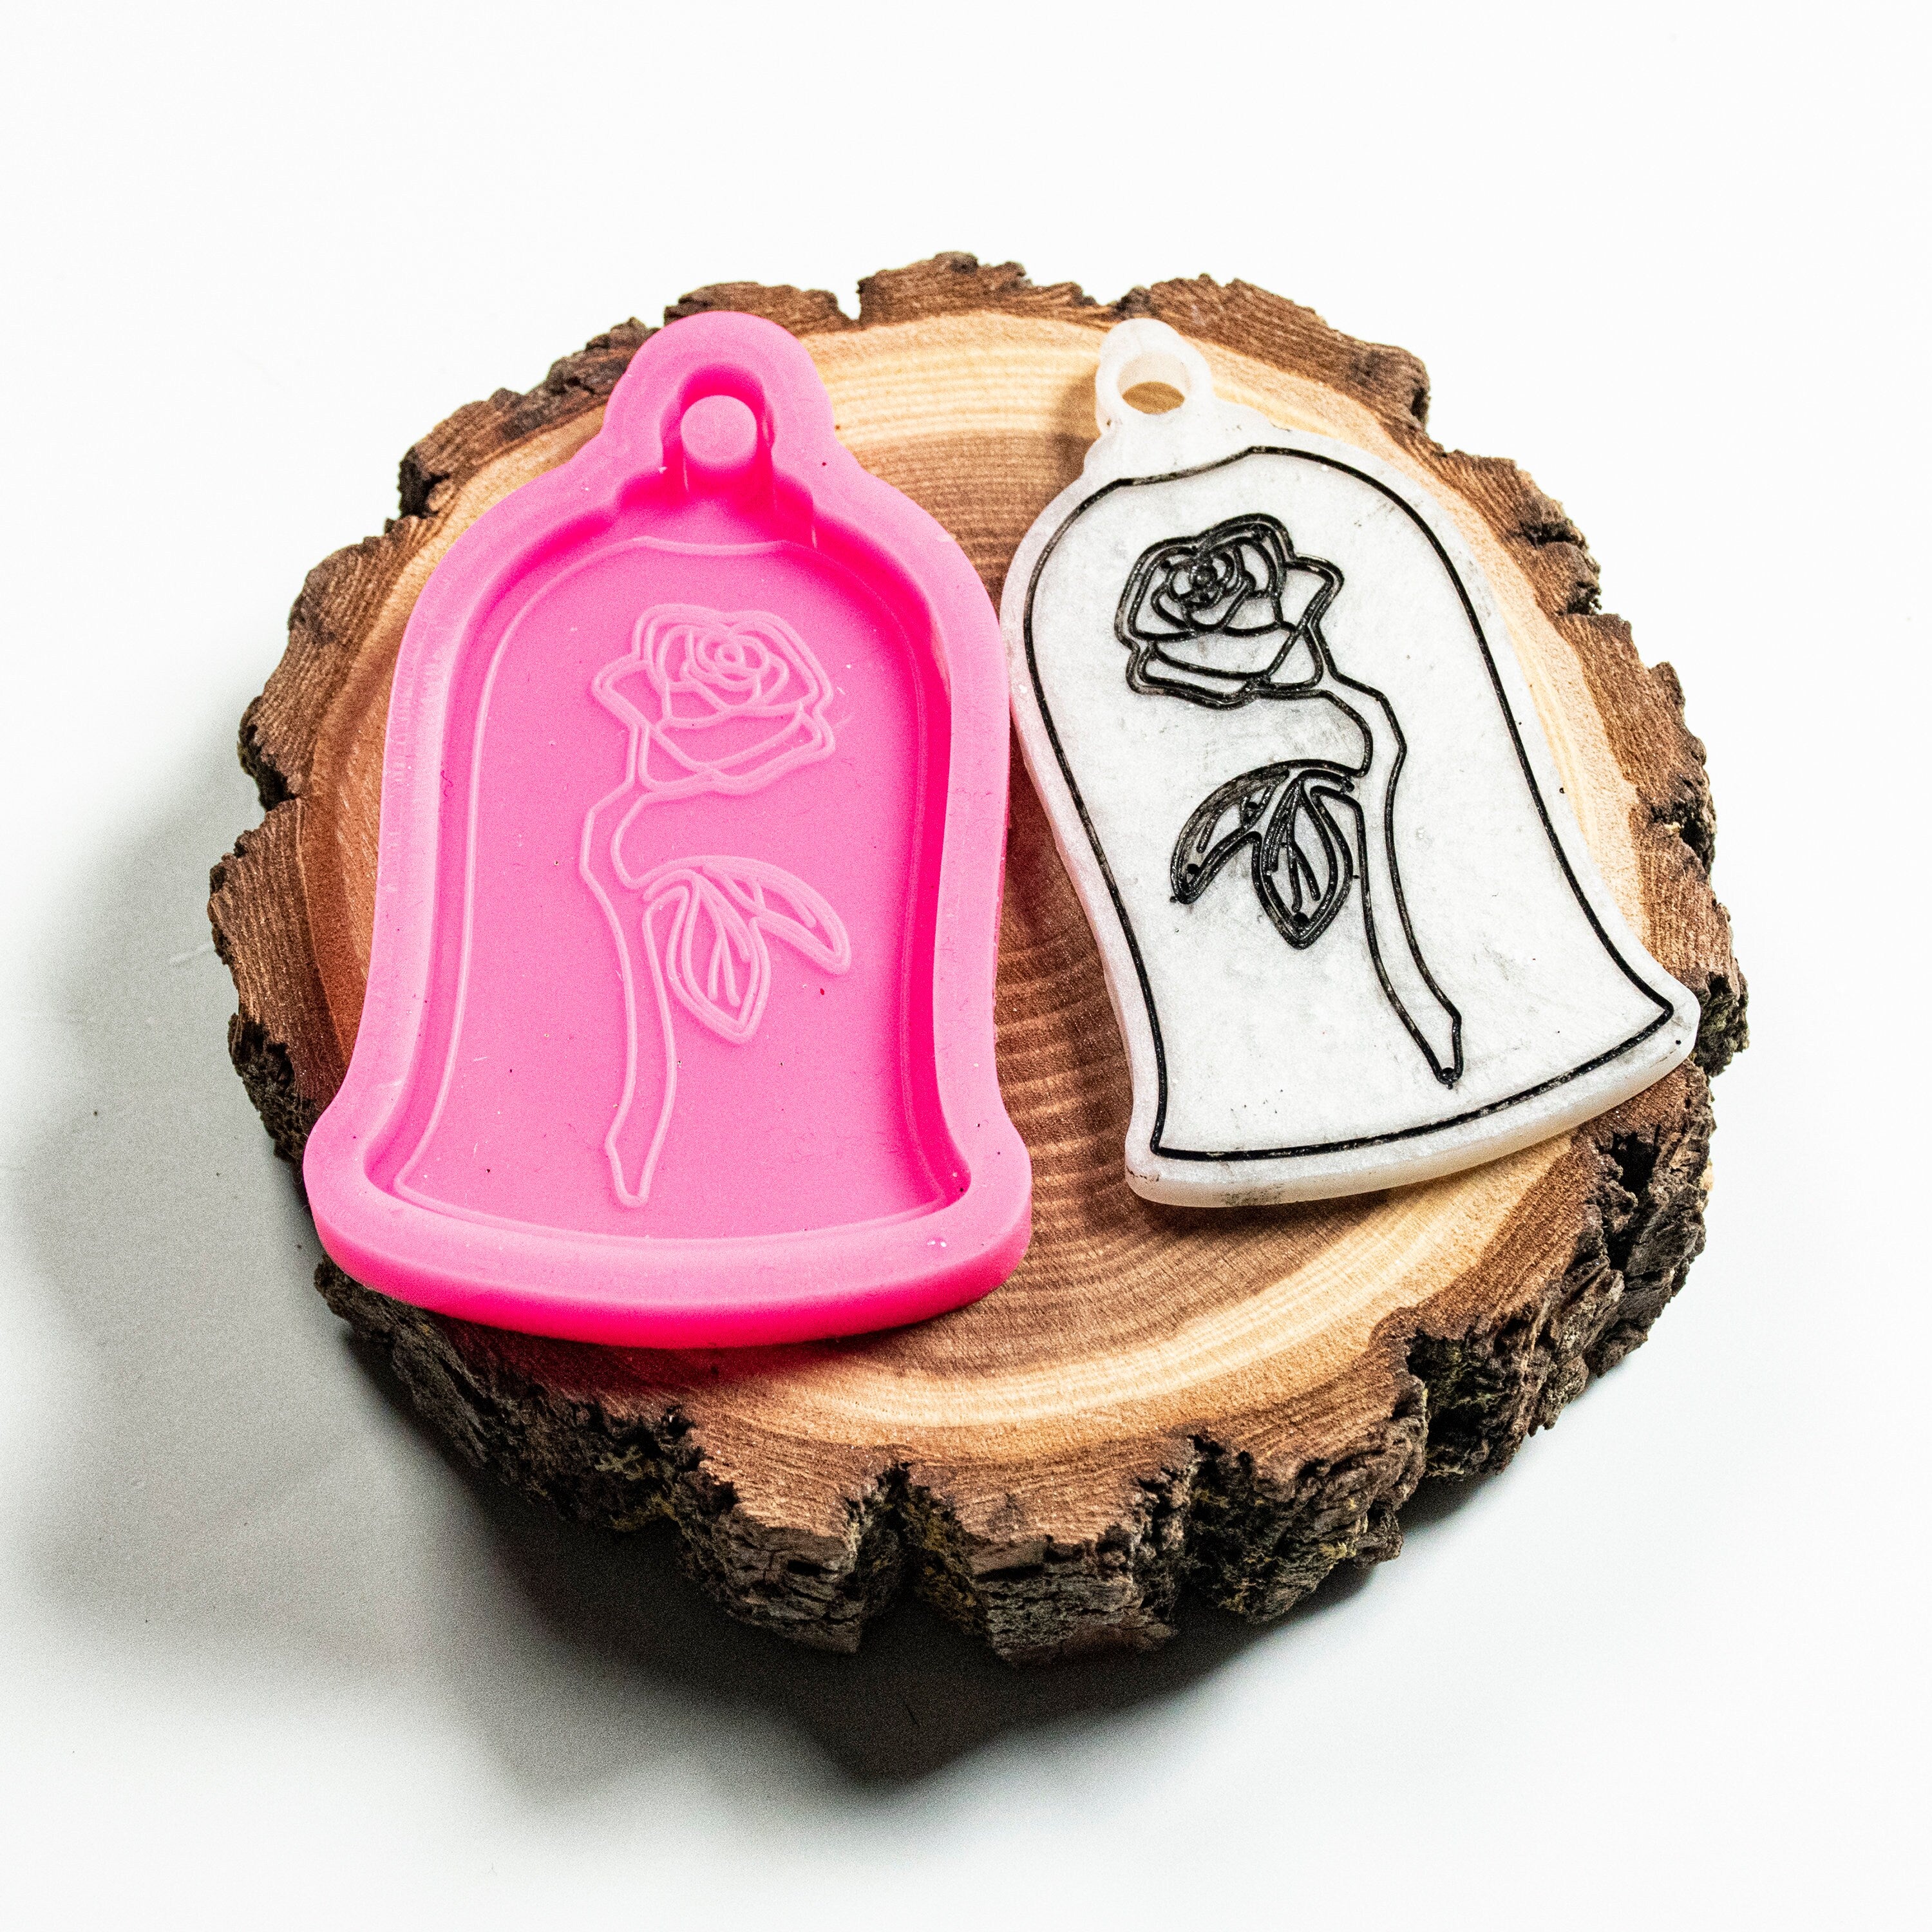 Enchanted Rose Shiny Silicone Mold for Epoxy Resin Keychain - Jewelry Making - Ornament Silicone Mold